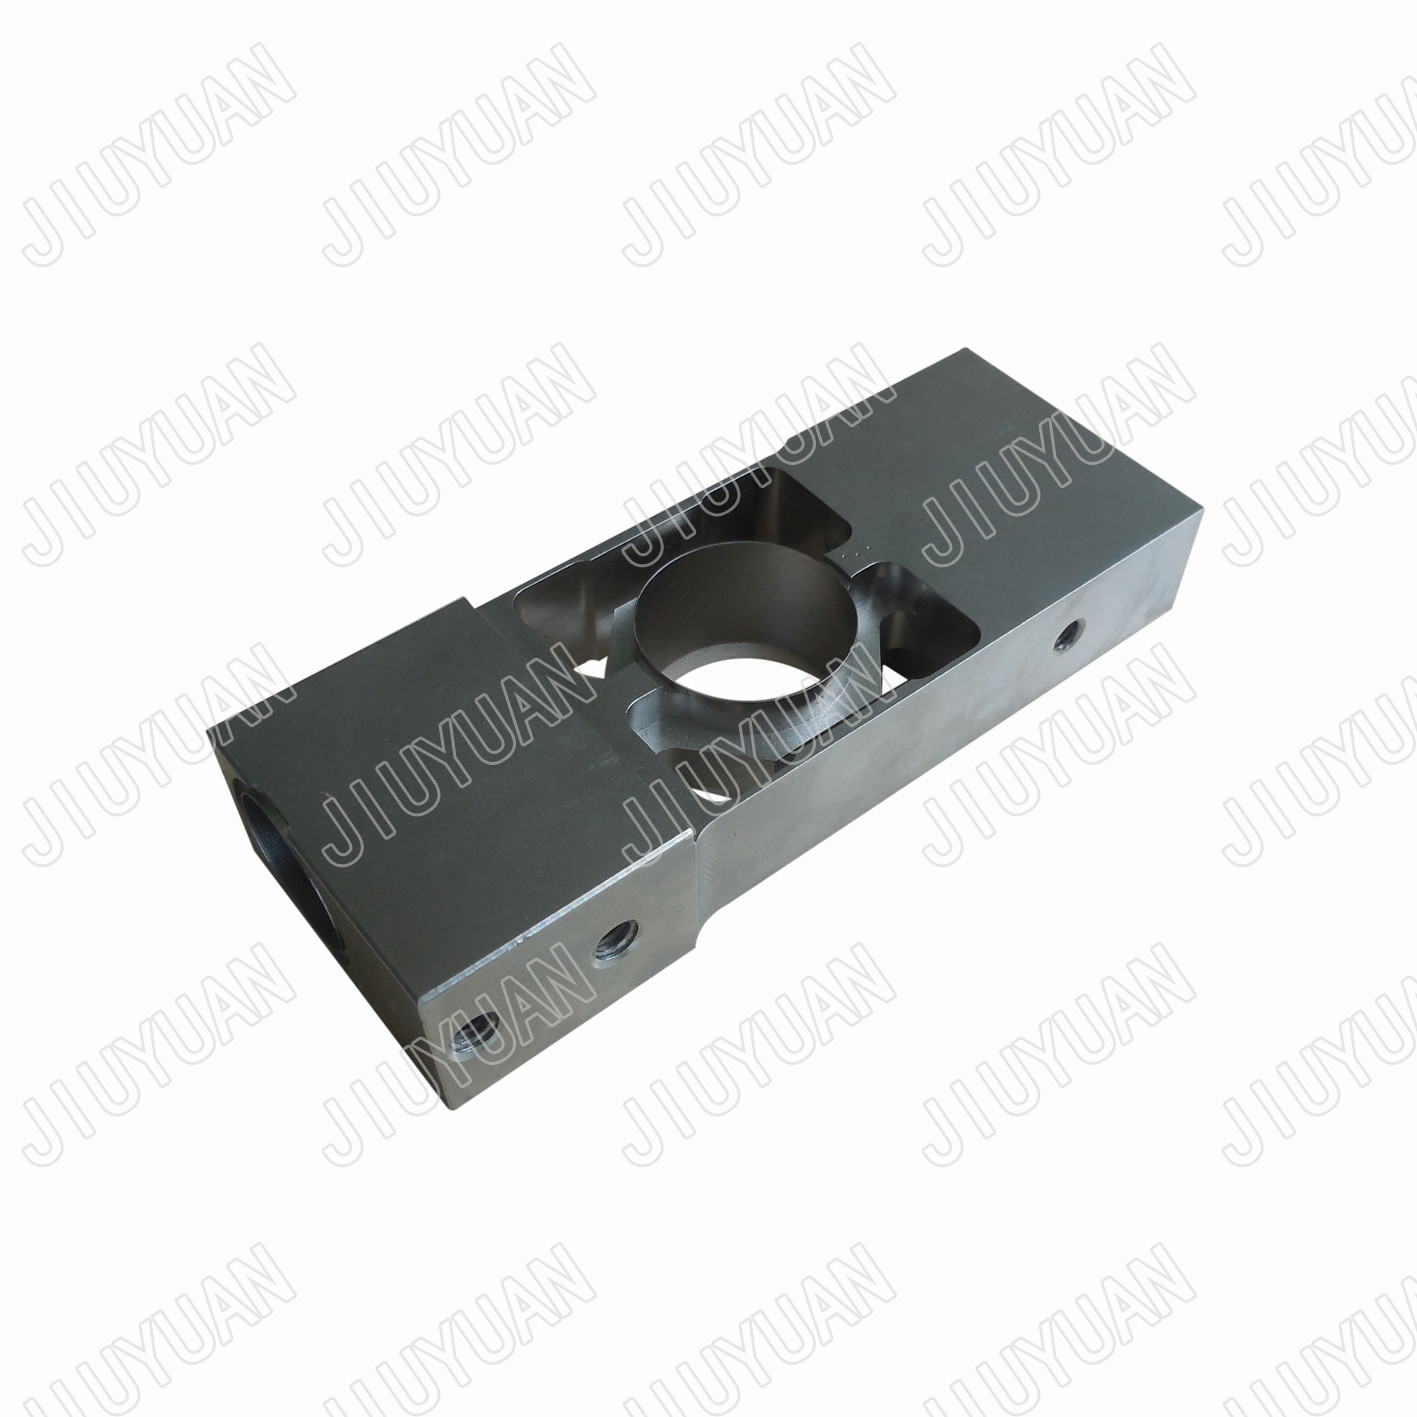 Steel CNC precision machining part for electronic scale